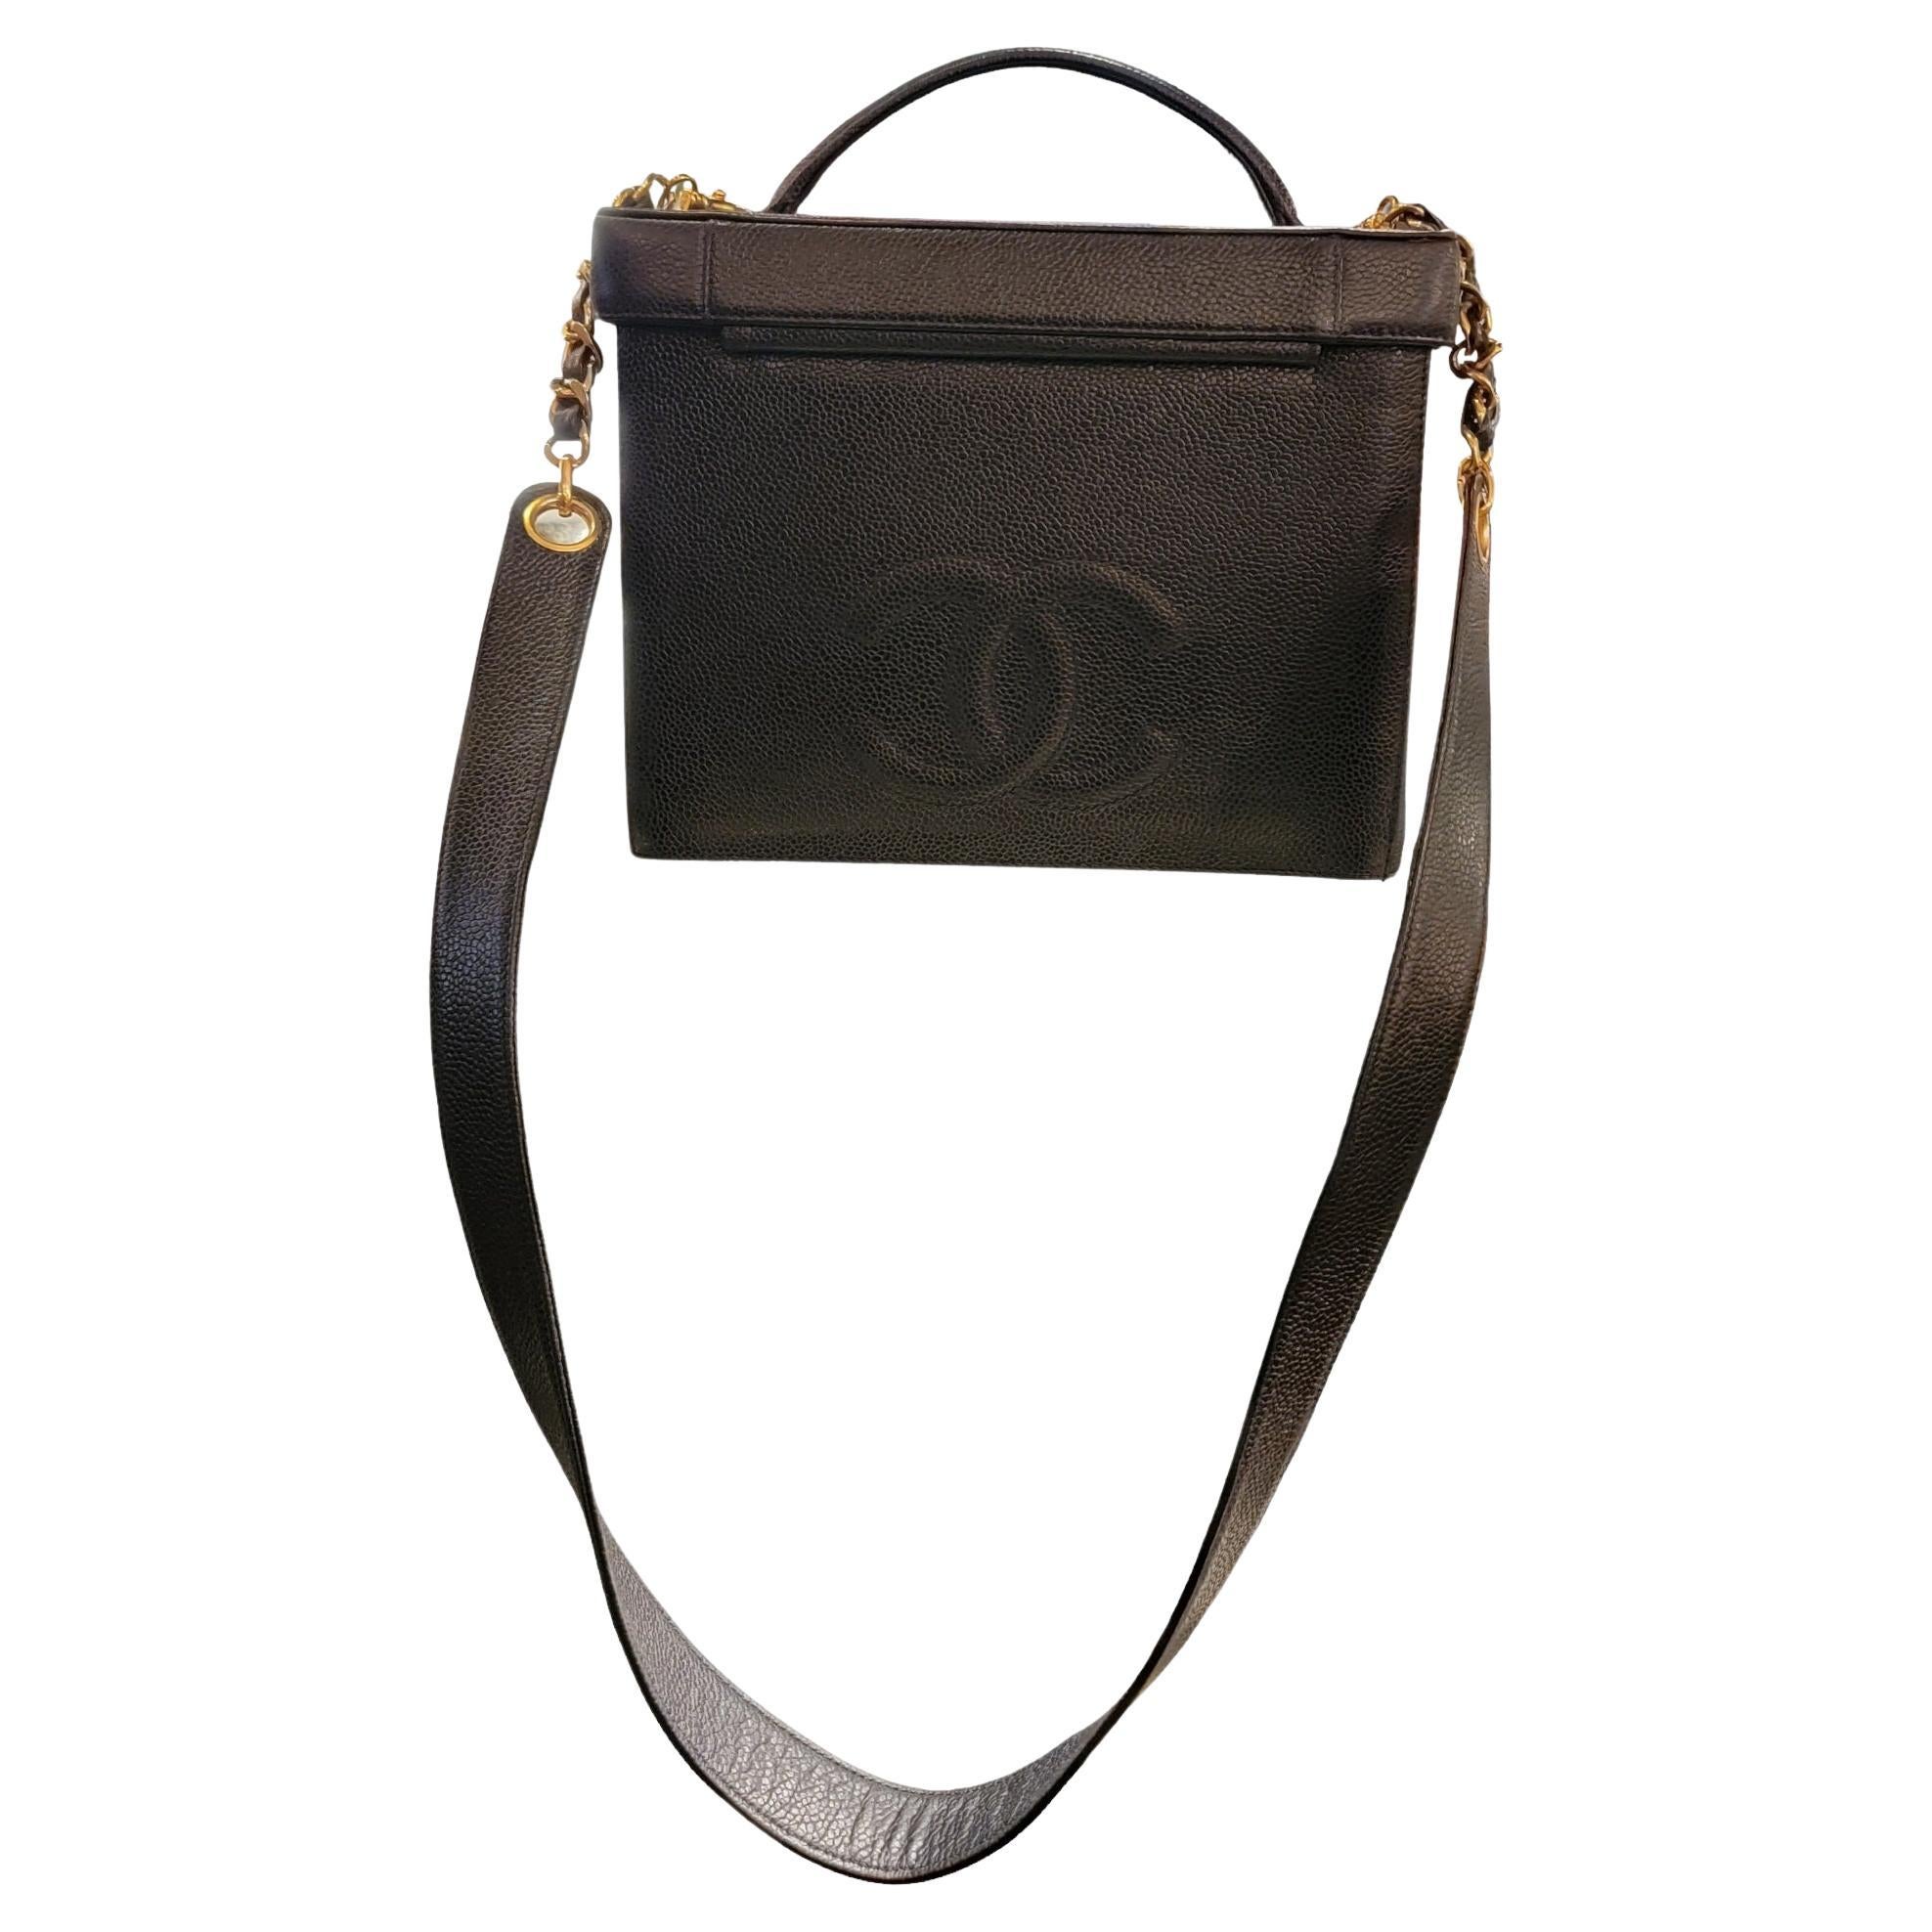 Chanel 2 way CC hand and shoulder bag that opens up with a mirror underneath the cover. The  leather has a large Golden CC buckle in front and a large leather CC in back. The straps are made from the same caviar leather and gold accents. 
The